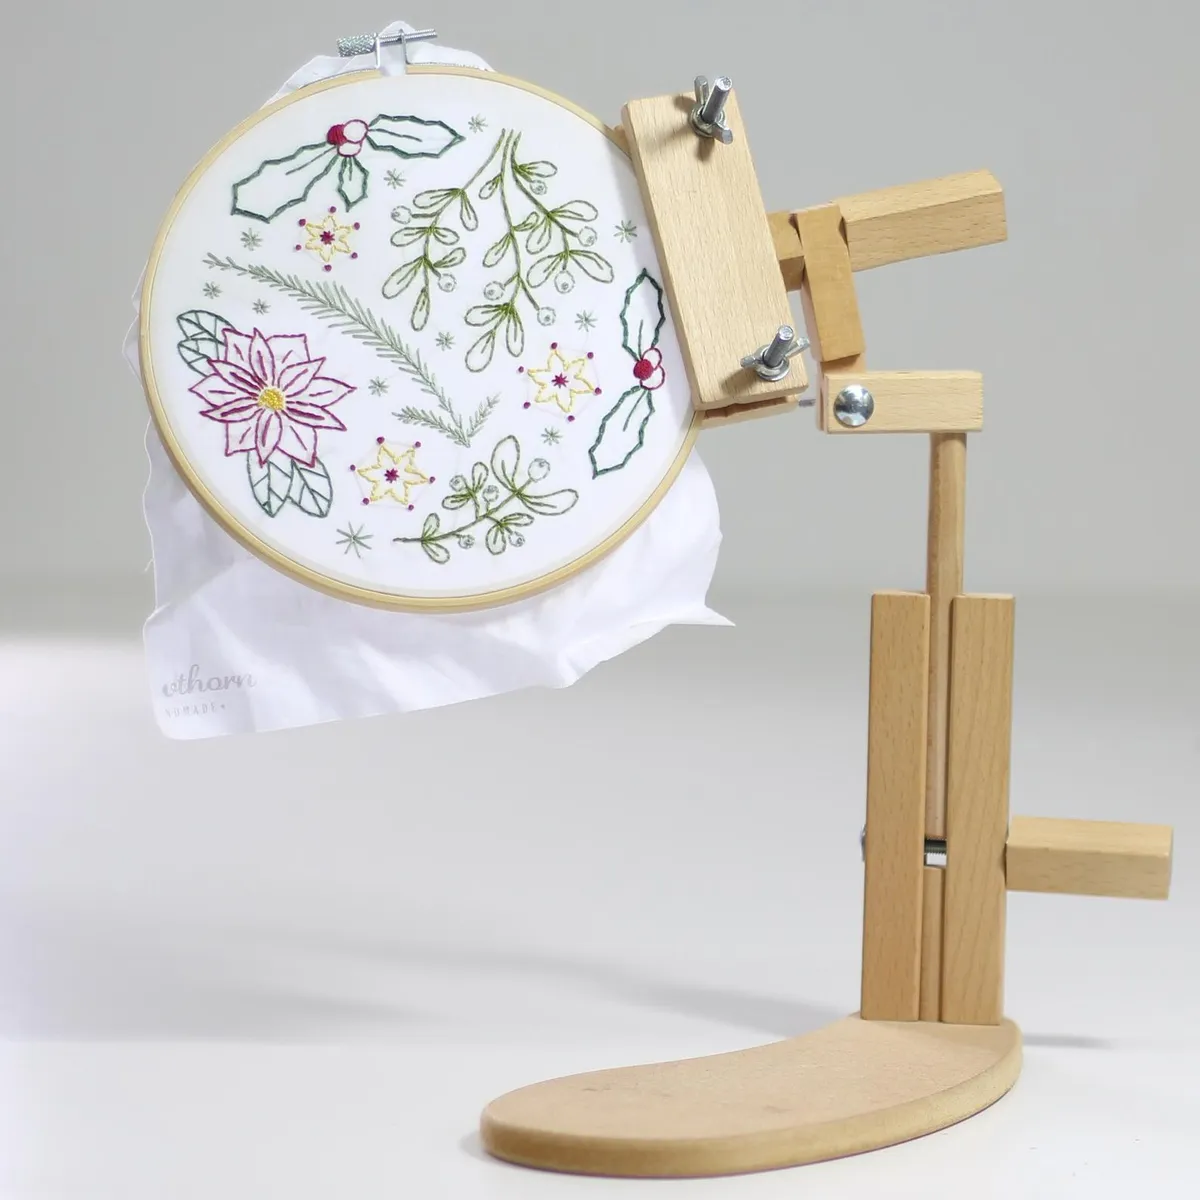 Adjustable Embroidery Stand Guofa Embroidery Hoop Stand Rotated